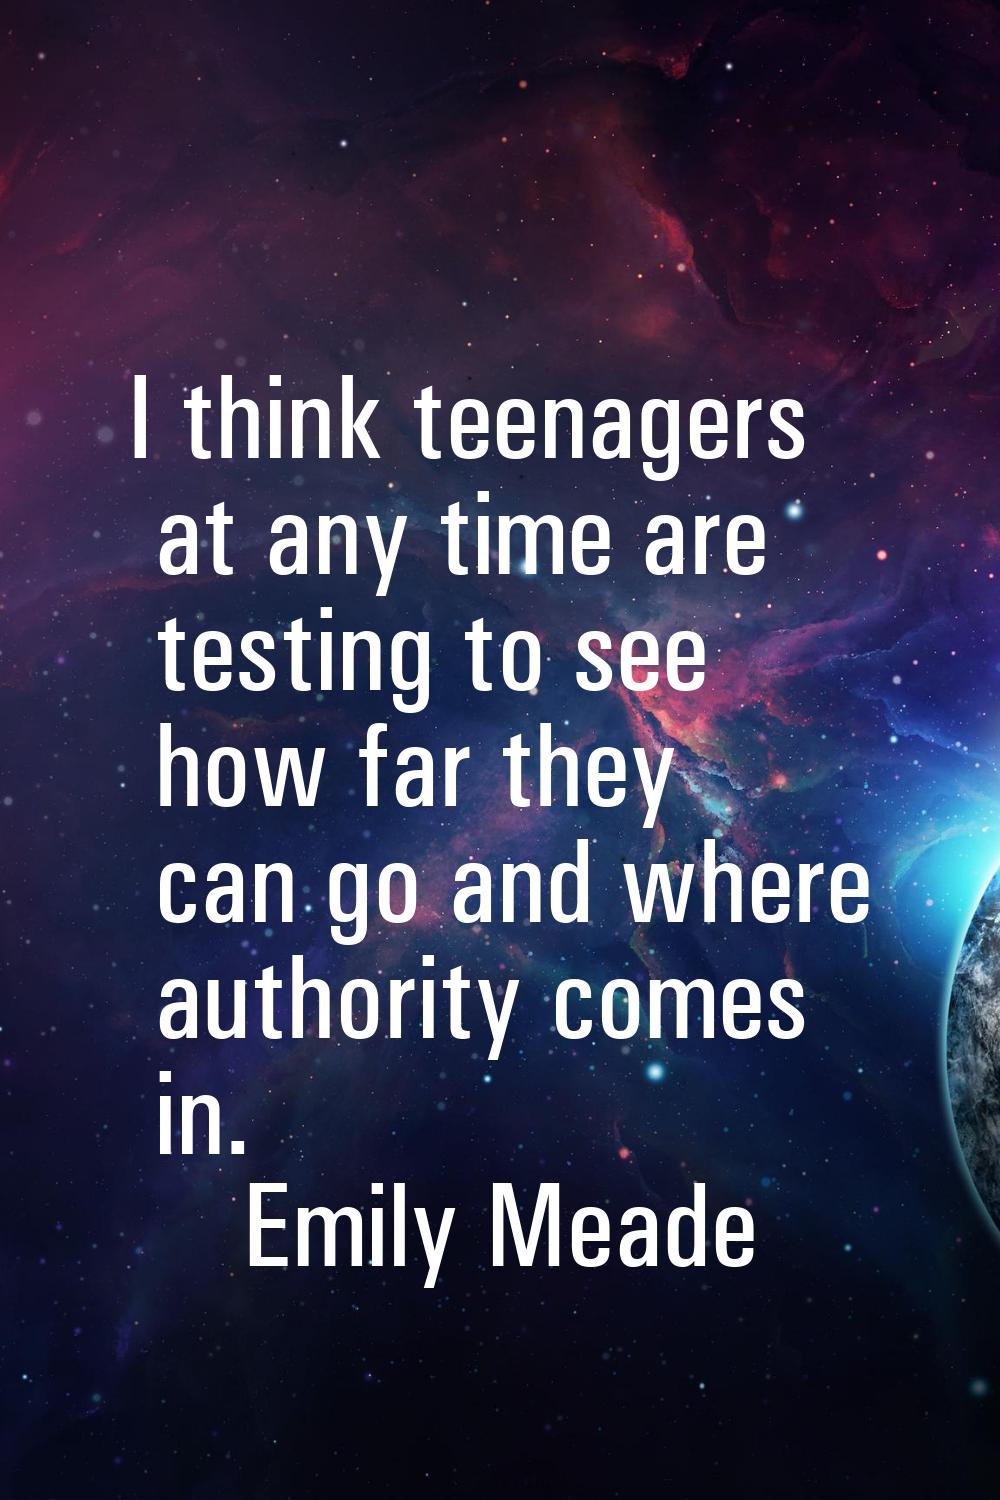 I think teenagers at any time are testing to see how far they can go and where authority comes in.